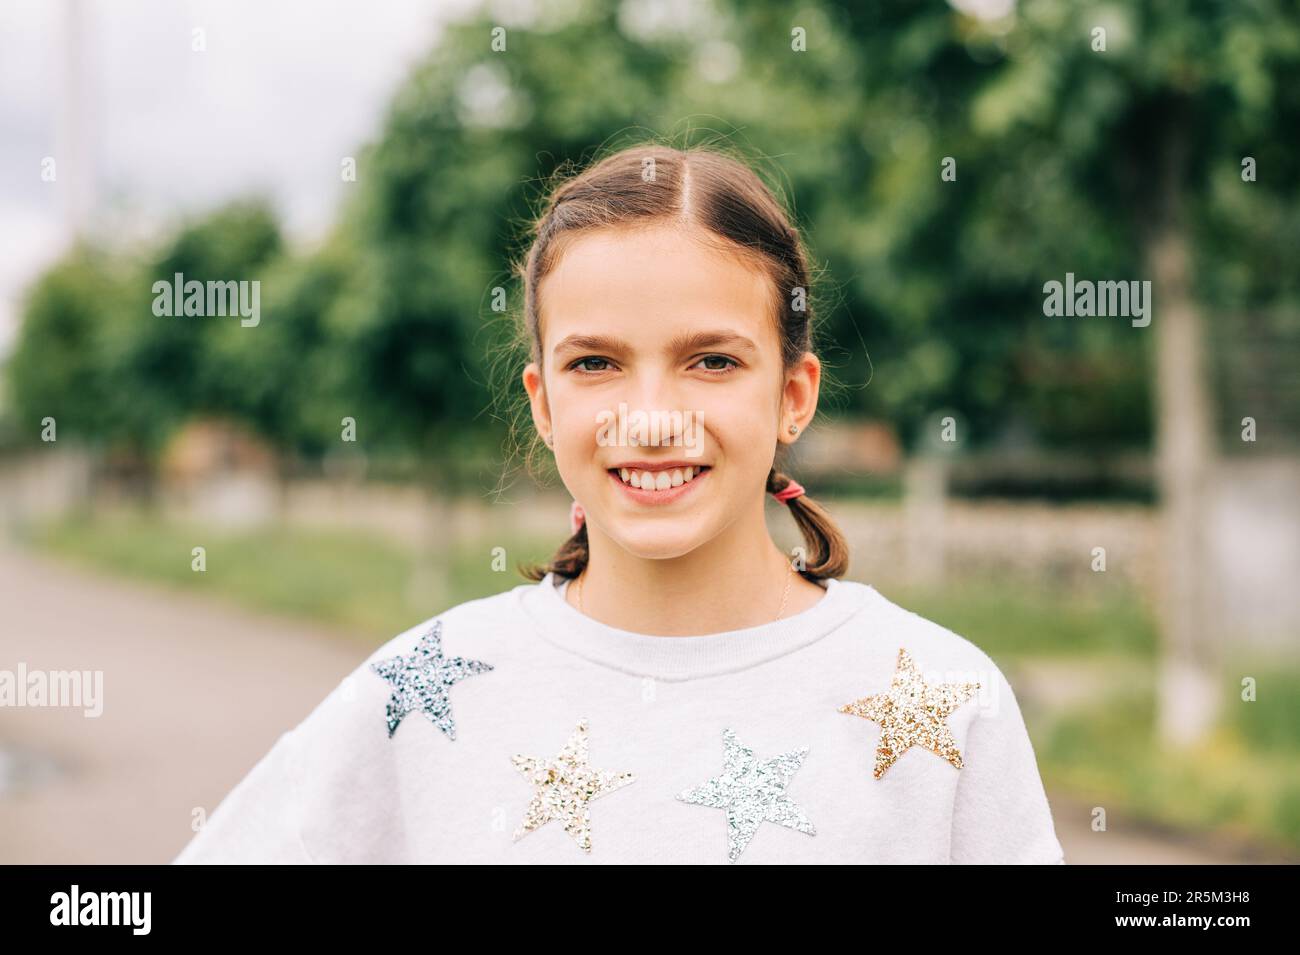 Outdoor Fashion Portrait Of Cute Preteen 10 Year Old Kid Girl